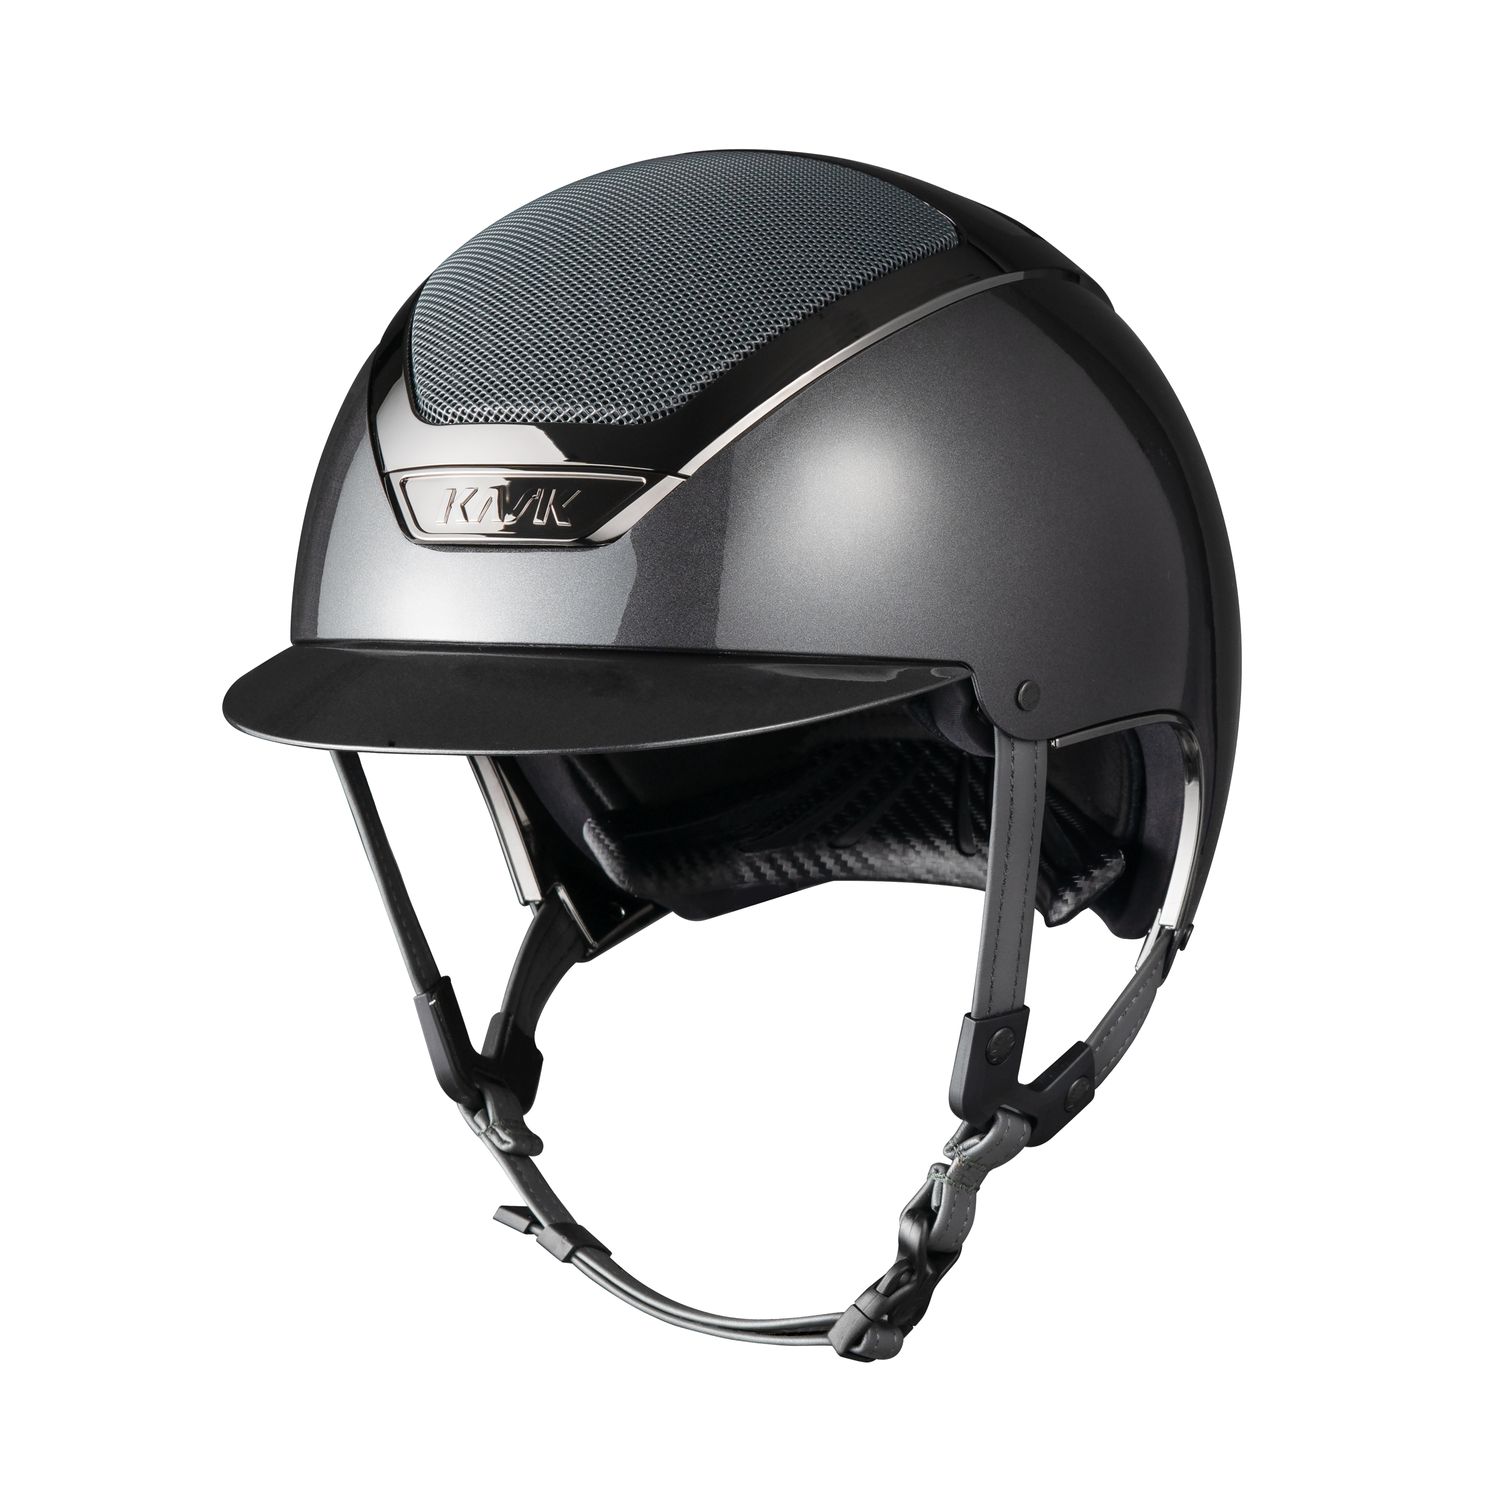 KASK Dogma Pure Shine Reithelm inkl. Liner von KASK